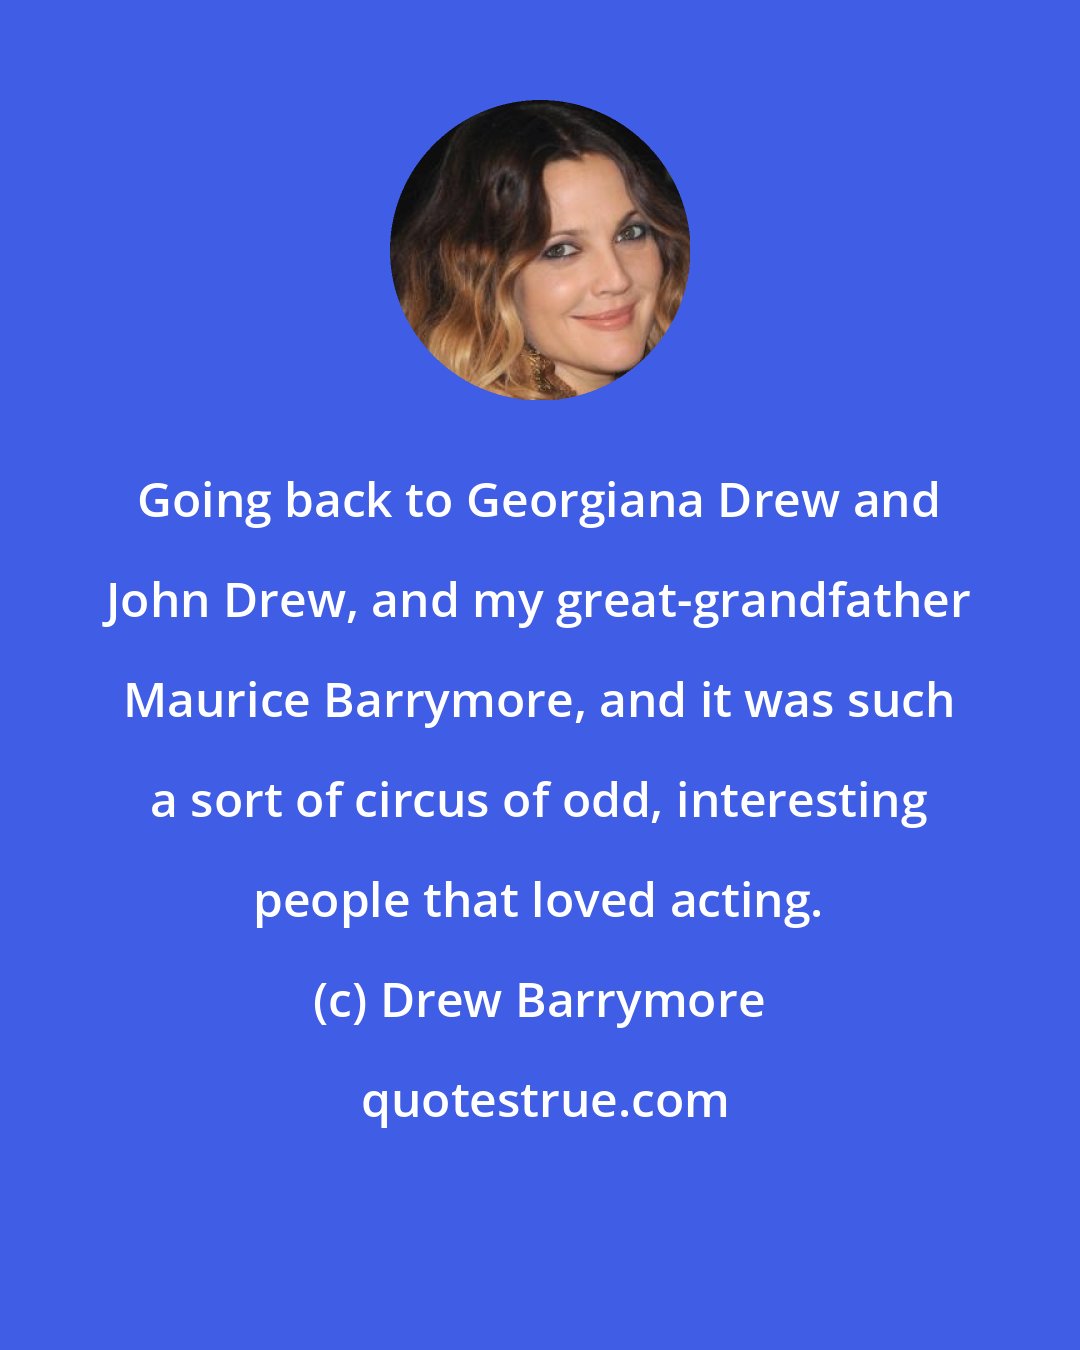 Drew Barrymore: Going back to Georgiana Drew and John Drew, and my great-grandfather Maurice Barrymore, and it was such a sort of circus of odd, interesting people that loved acting.